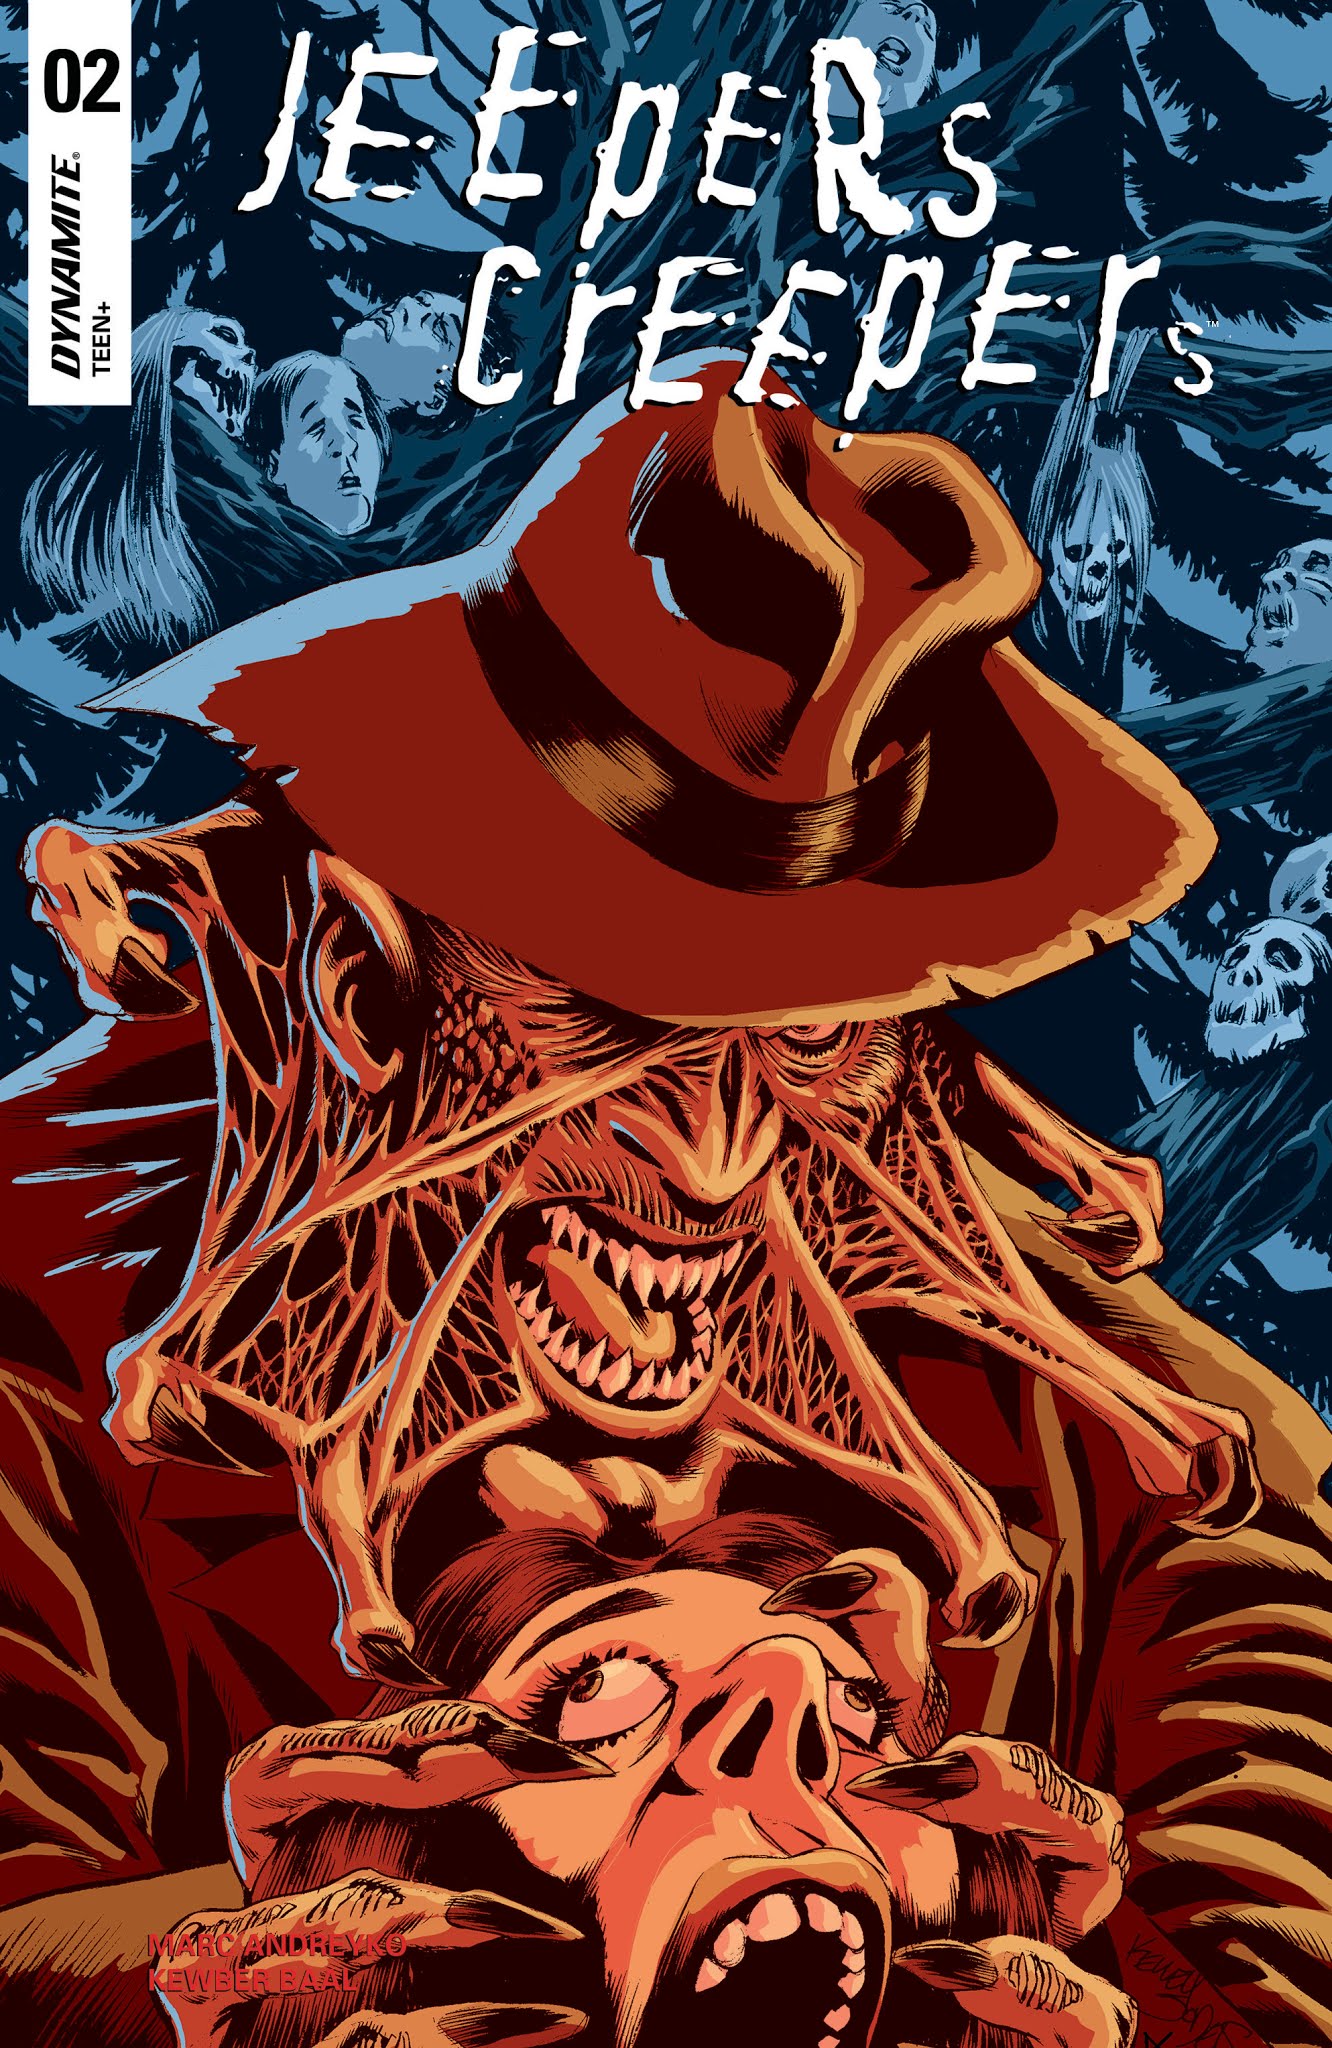 Read online Jeepers Creepers comic -  Issue #2 - 1